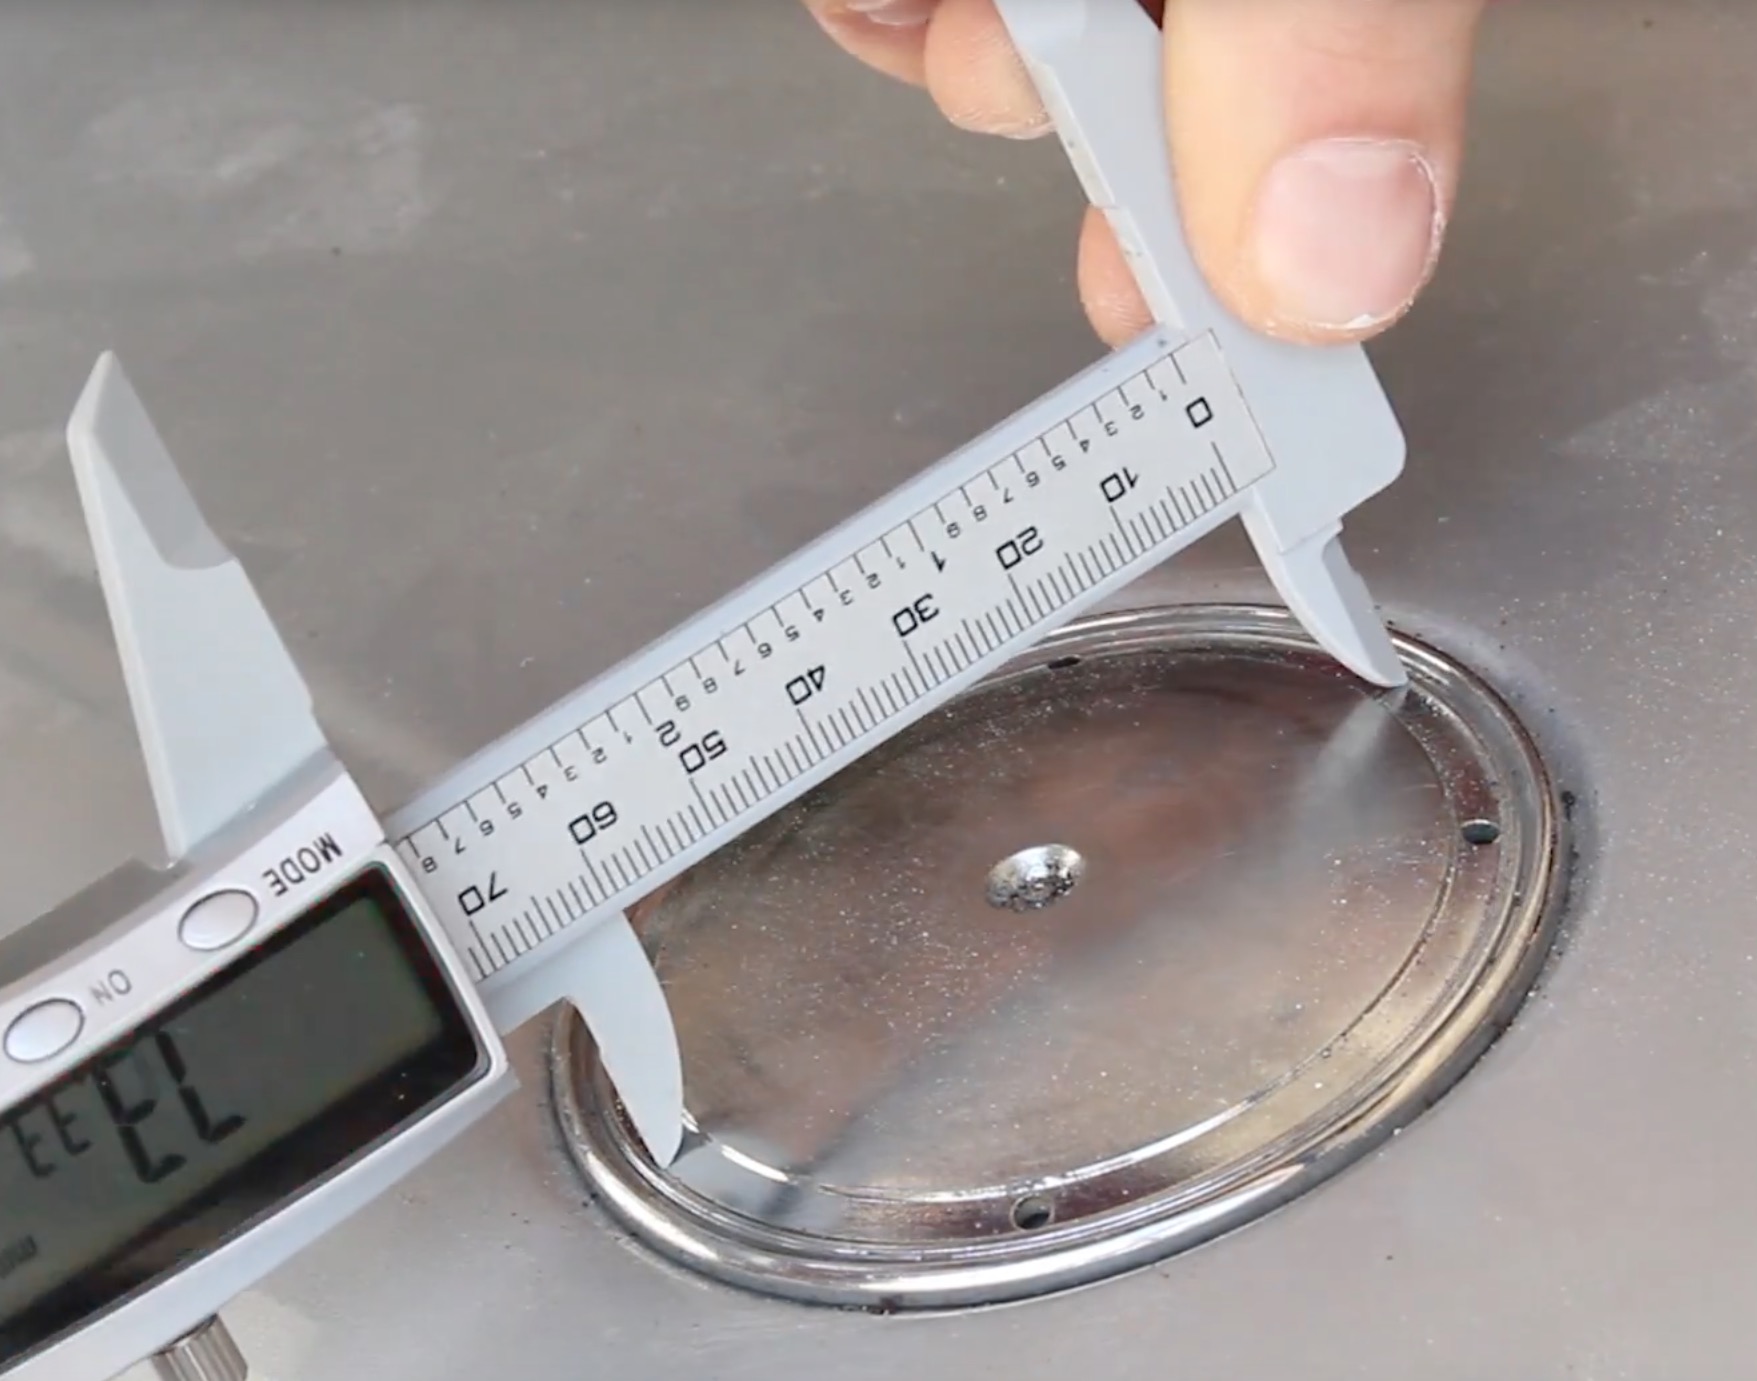  Measuring the replacement logo size 